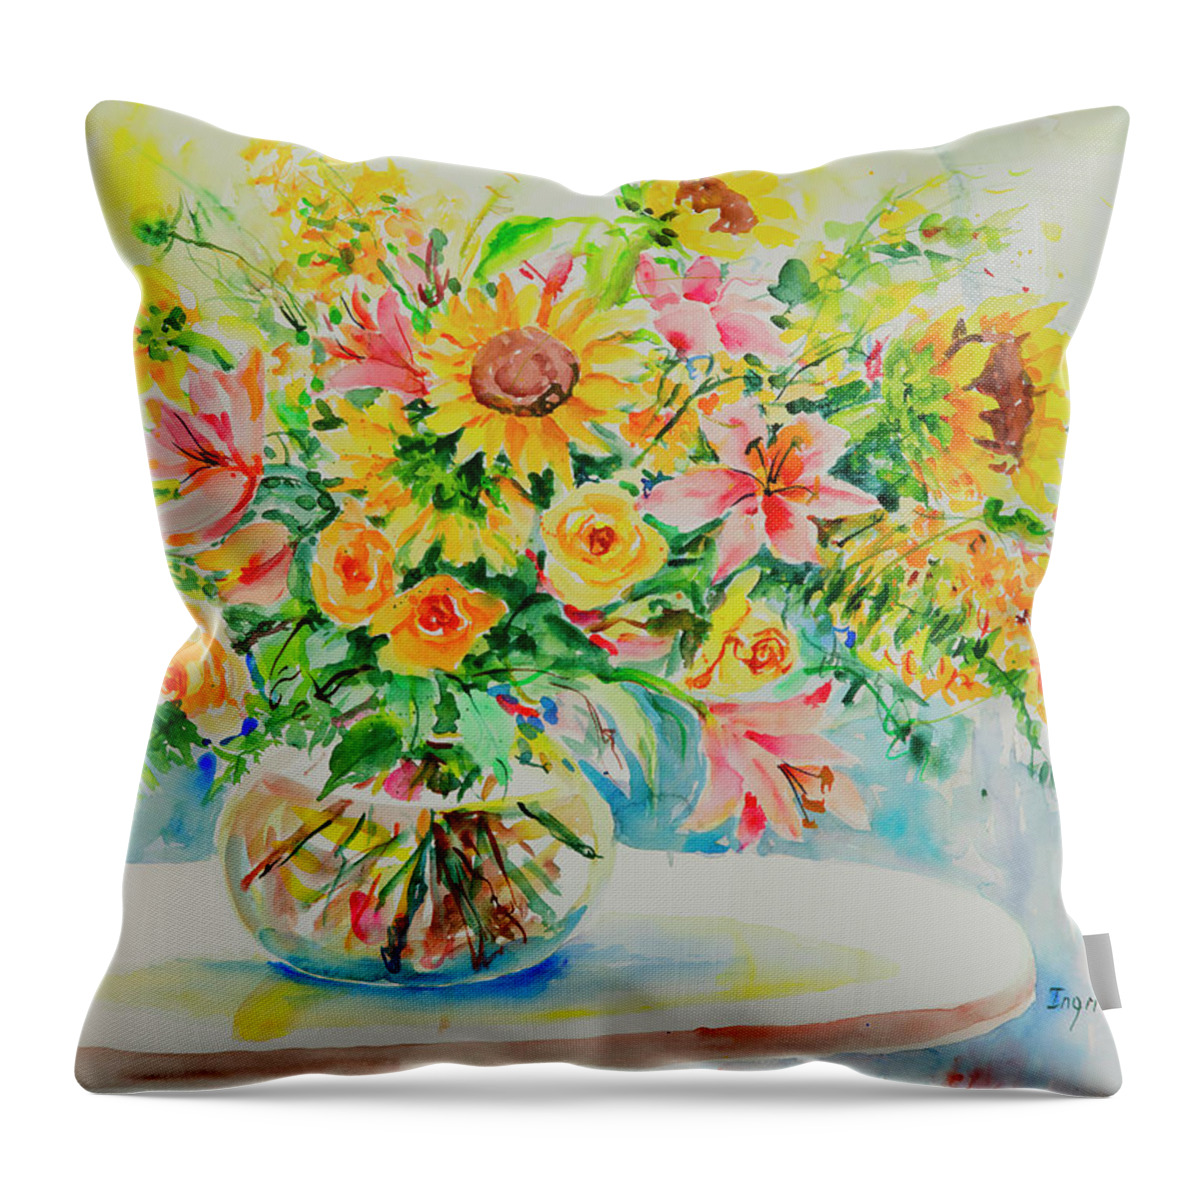 Flowers Throw Pillow featuring the painting Watercolor Series 185 by Ingrid Dohm